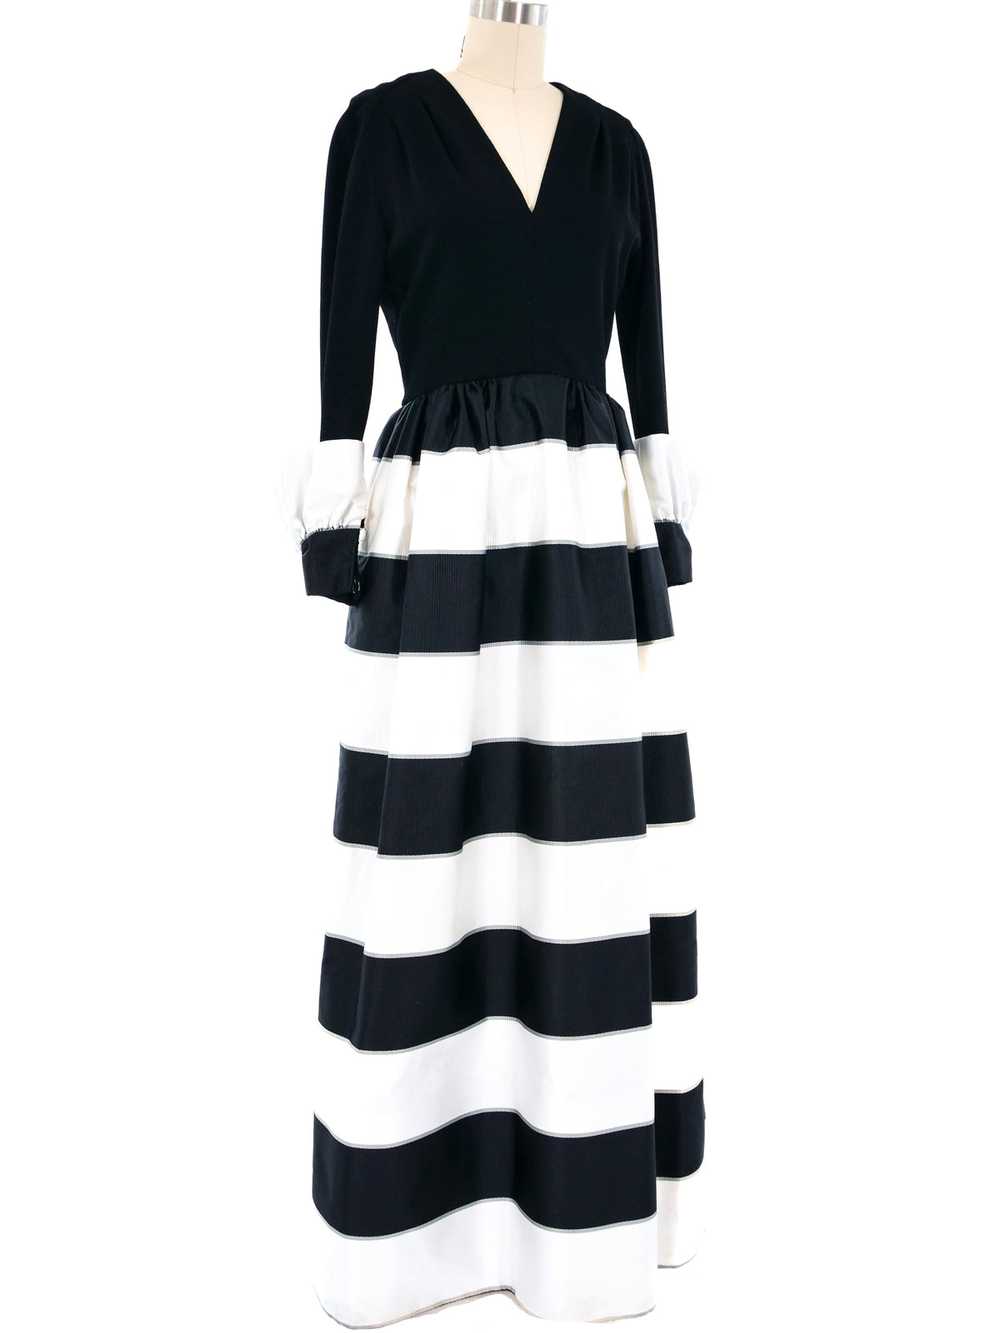 Pauline Trigere Black and White Striped Gown - image 2